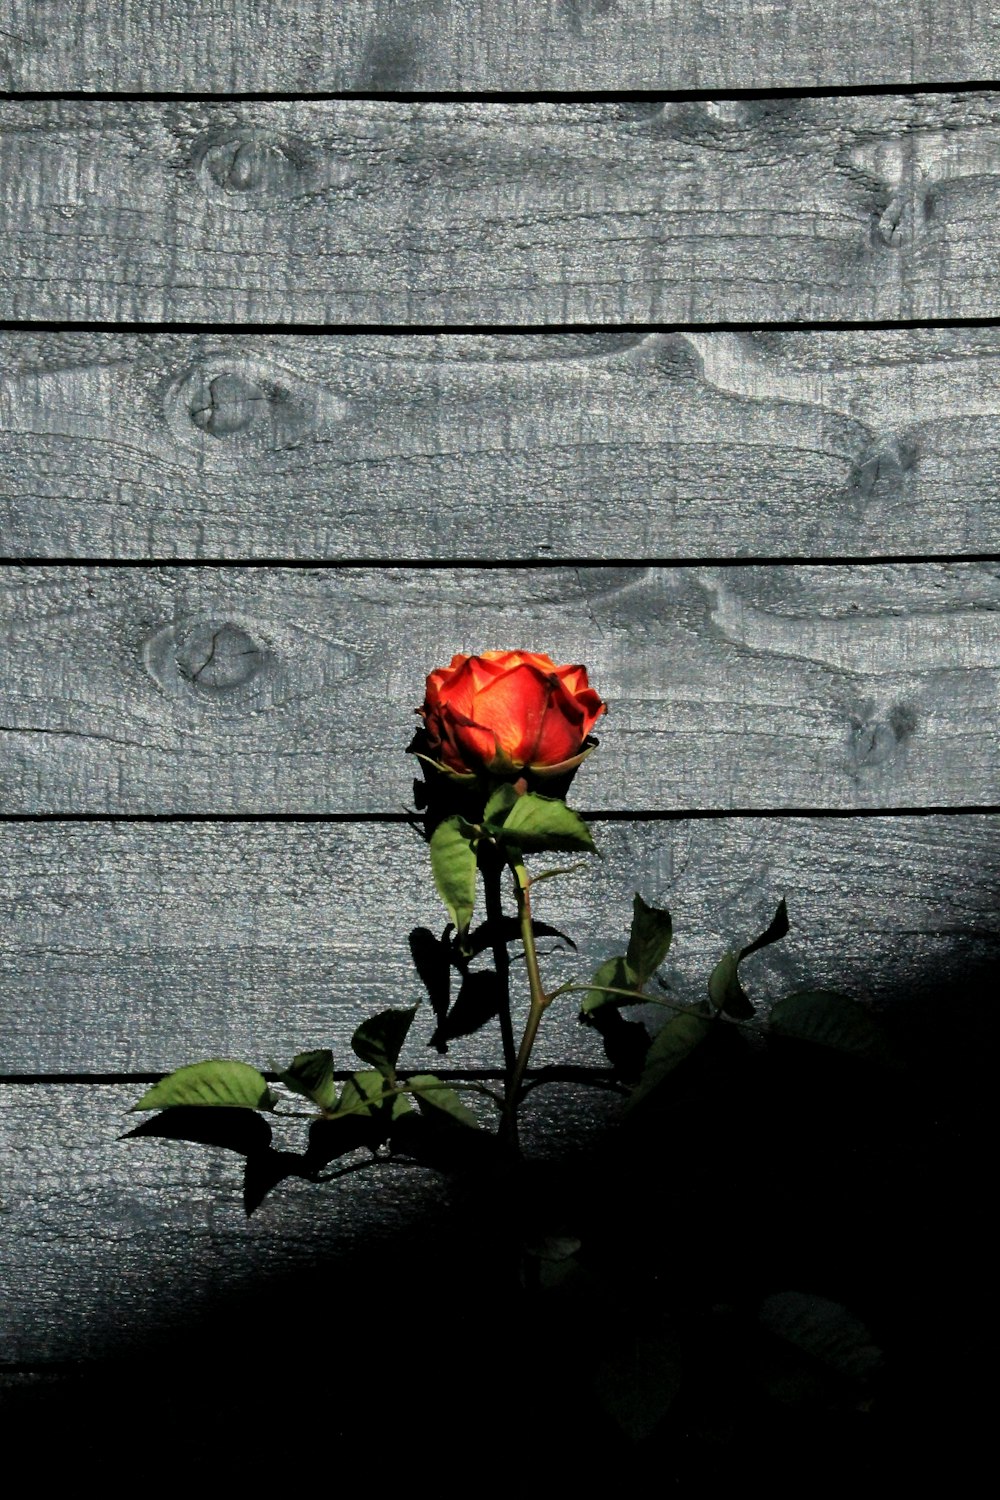 red rose in bloom on grey wooden fence